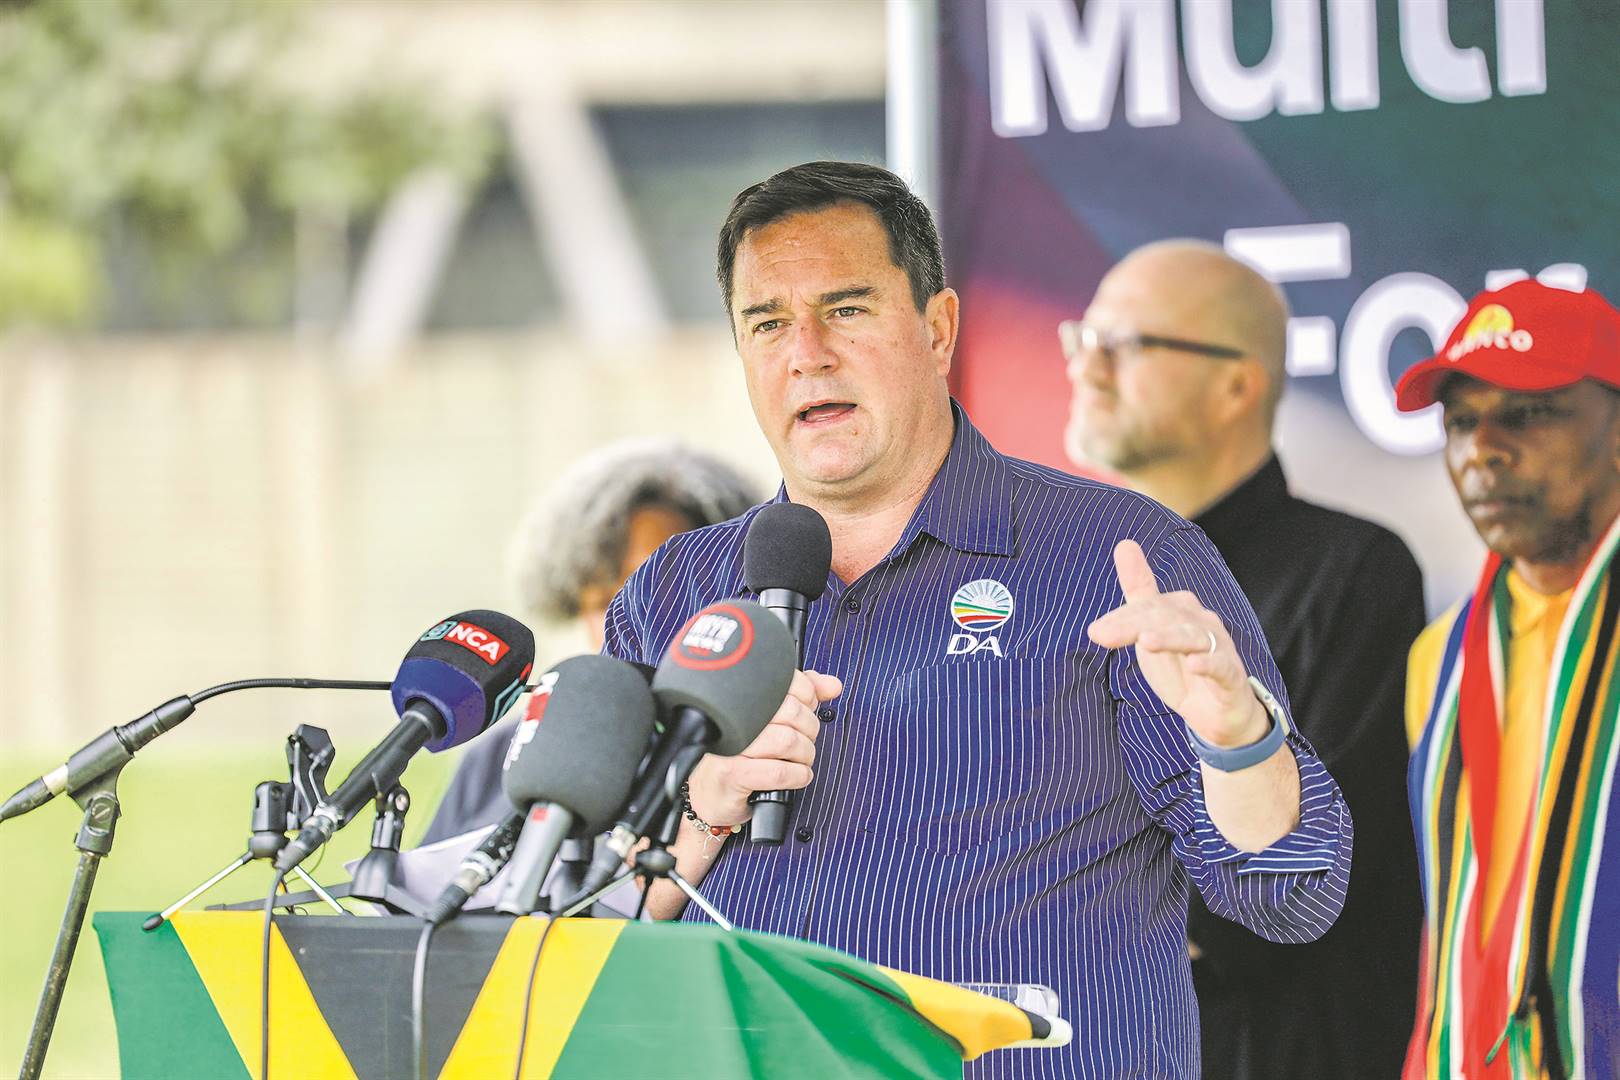 News24 | Steenhuisen denies claims of secret coalition plans with ANC thumbnail